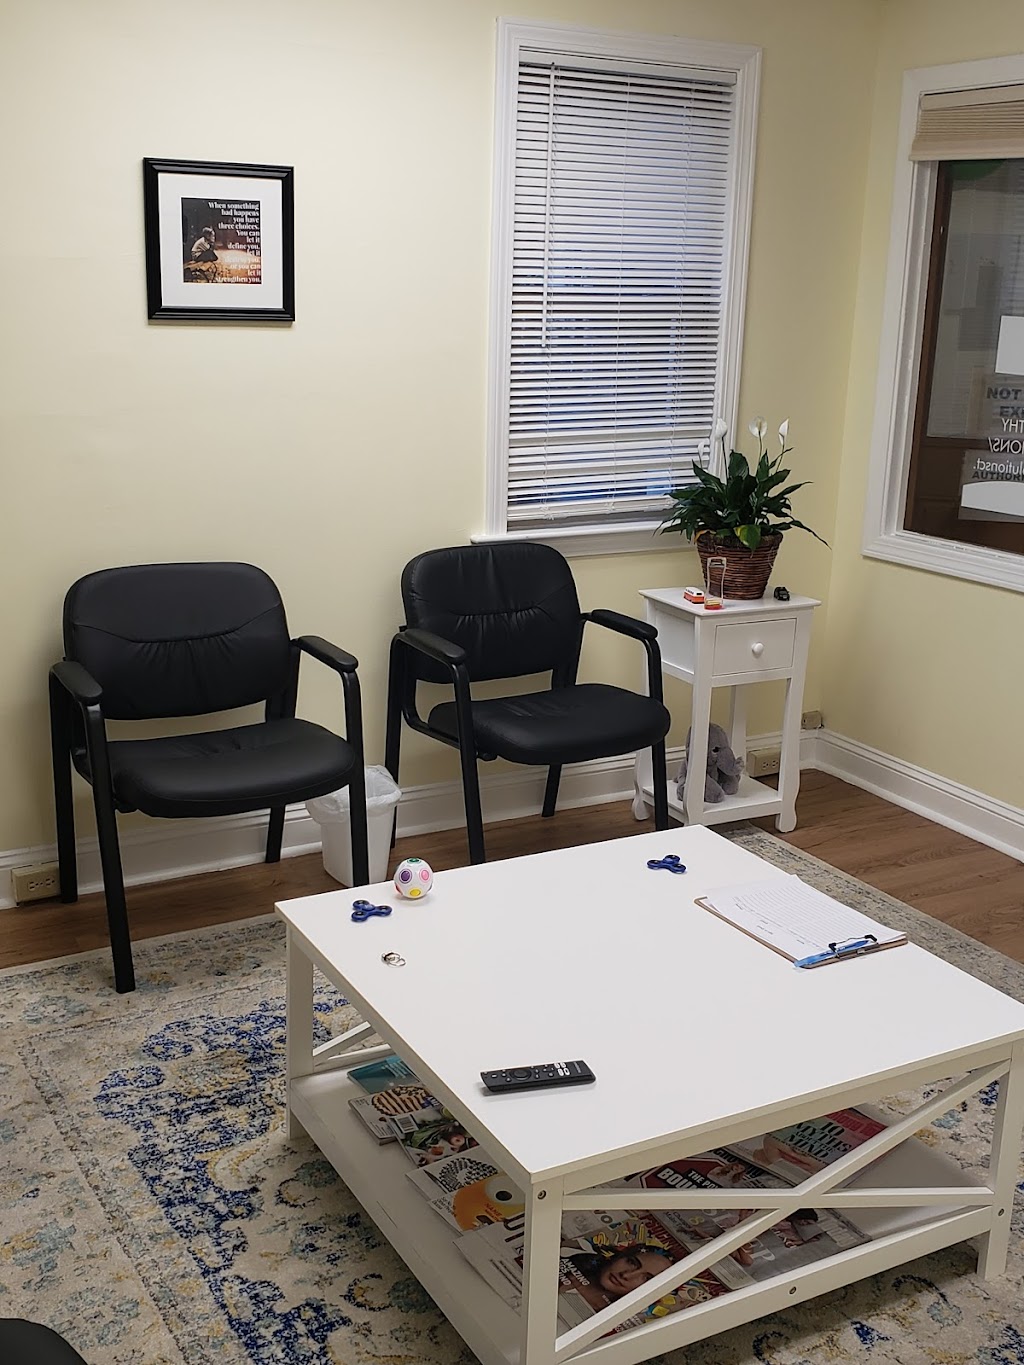 Healthy solutions -Alcohol and Drug counseling | 843 Main St, Manchester, CT 06040 | Phone: (860) 559-8257